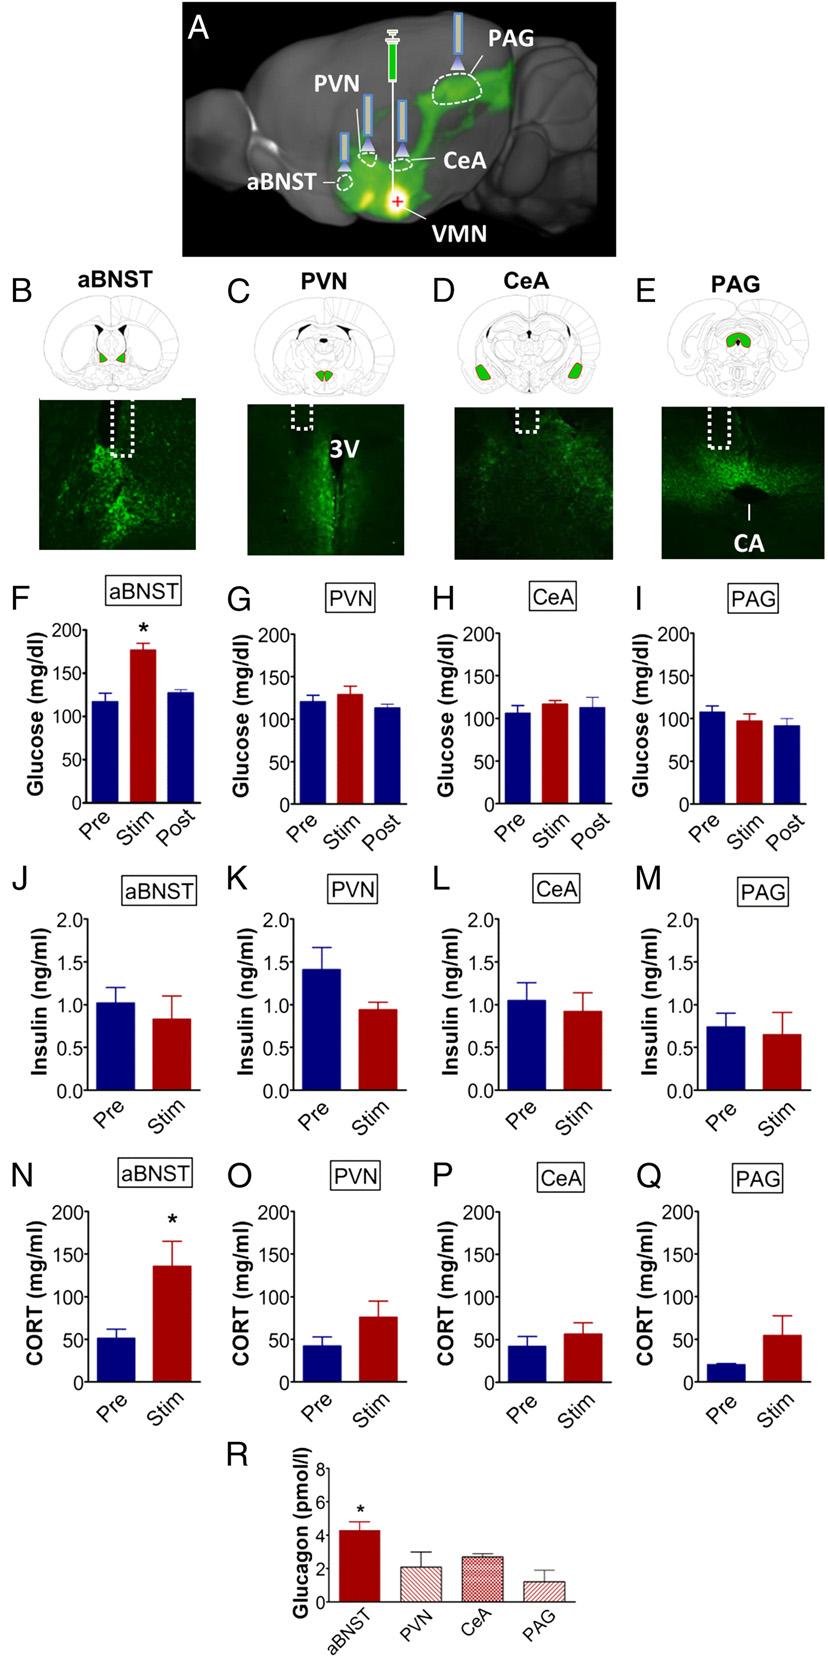 Fig. 5. Photoactivation of VMN SF1 abnst projections selectively promote hyperglycemia in nondiabetic mice.